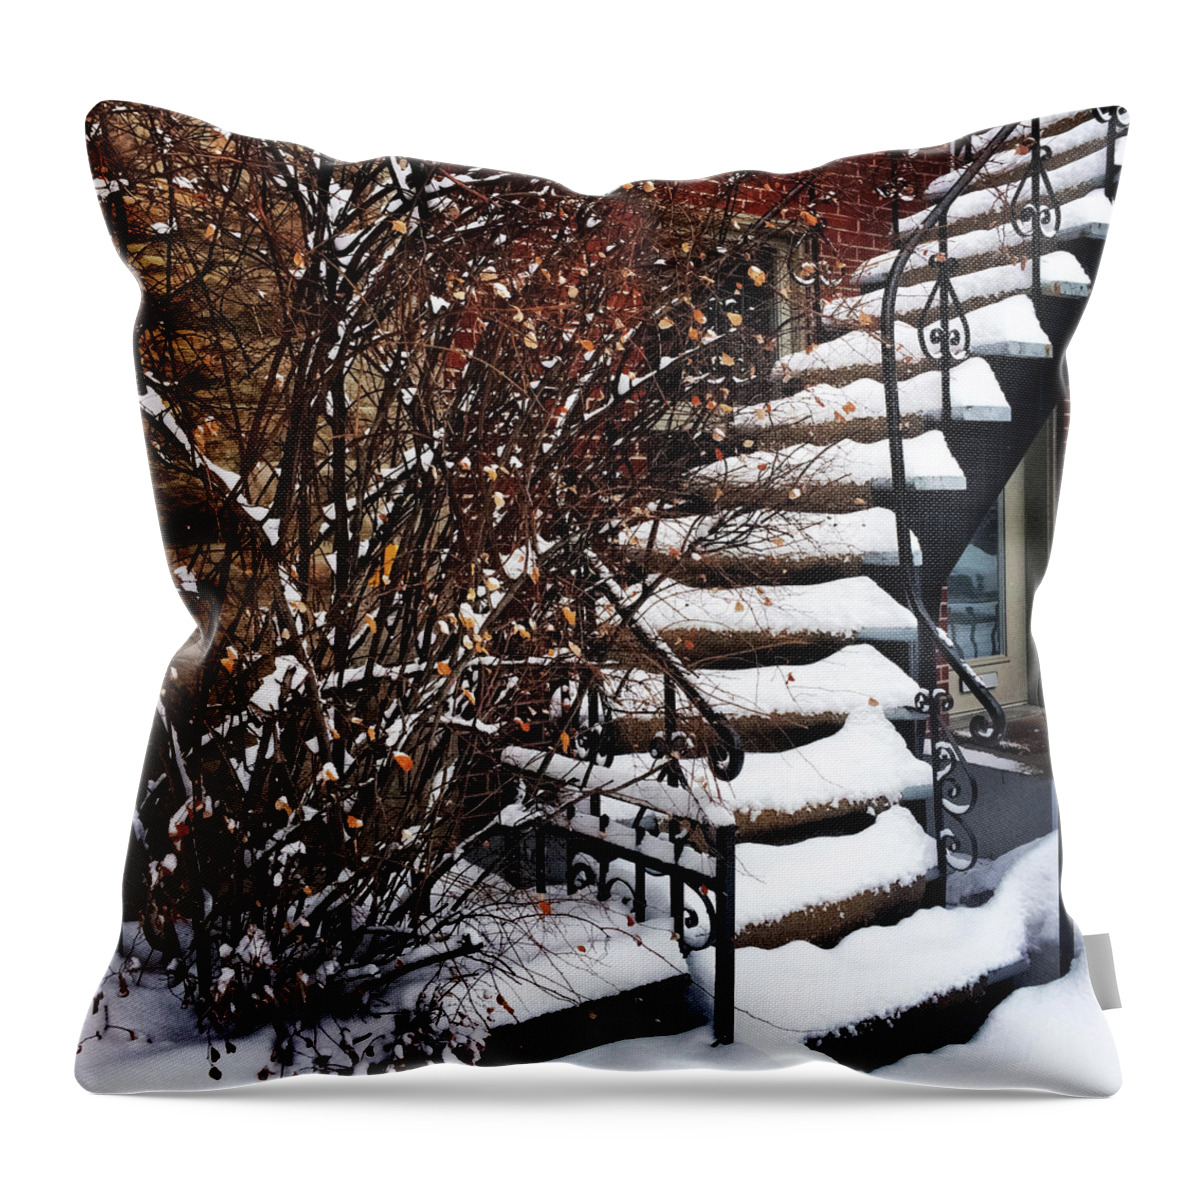 Montreal Throw Pillow featuring the photograph Staircase covered by snow by GoodMood Art